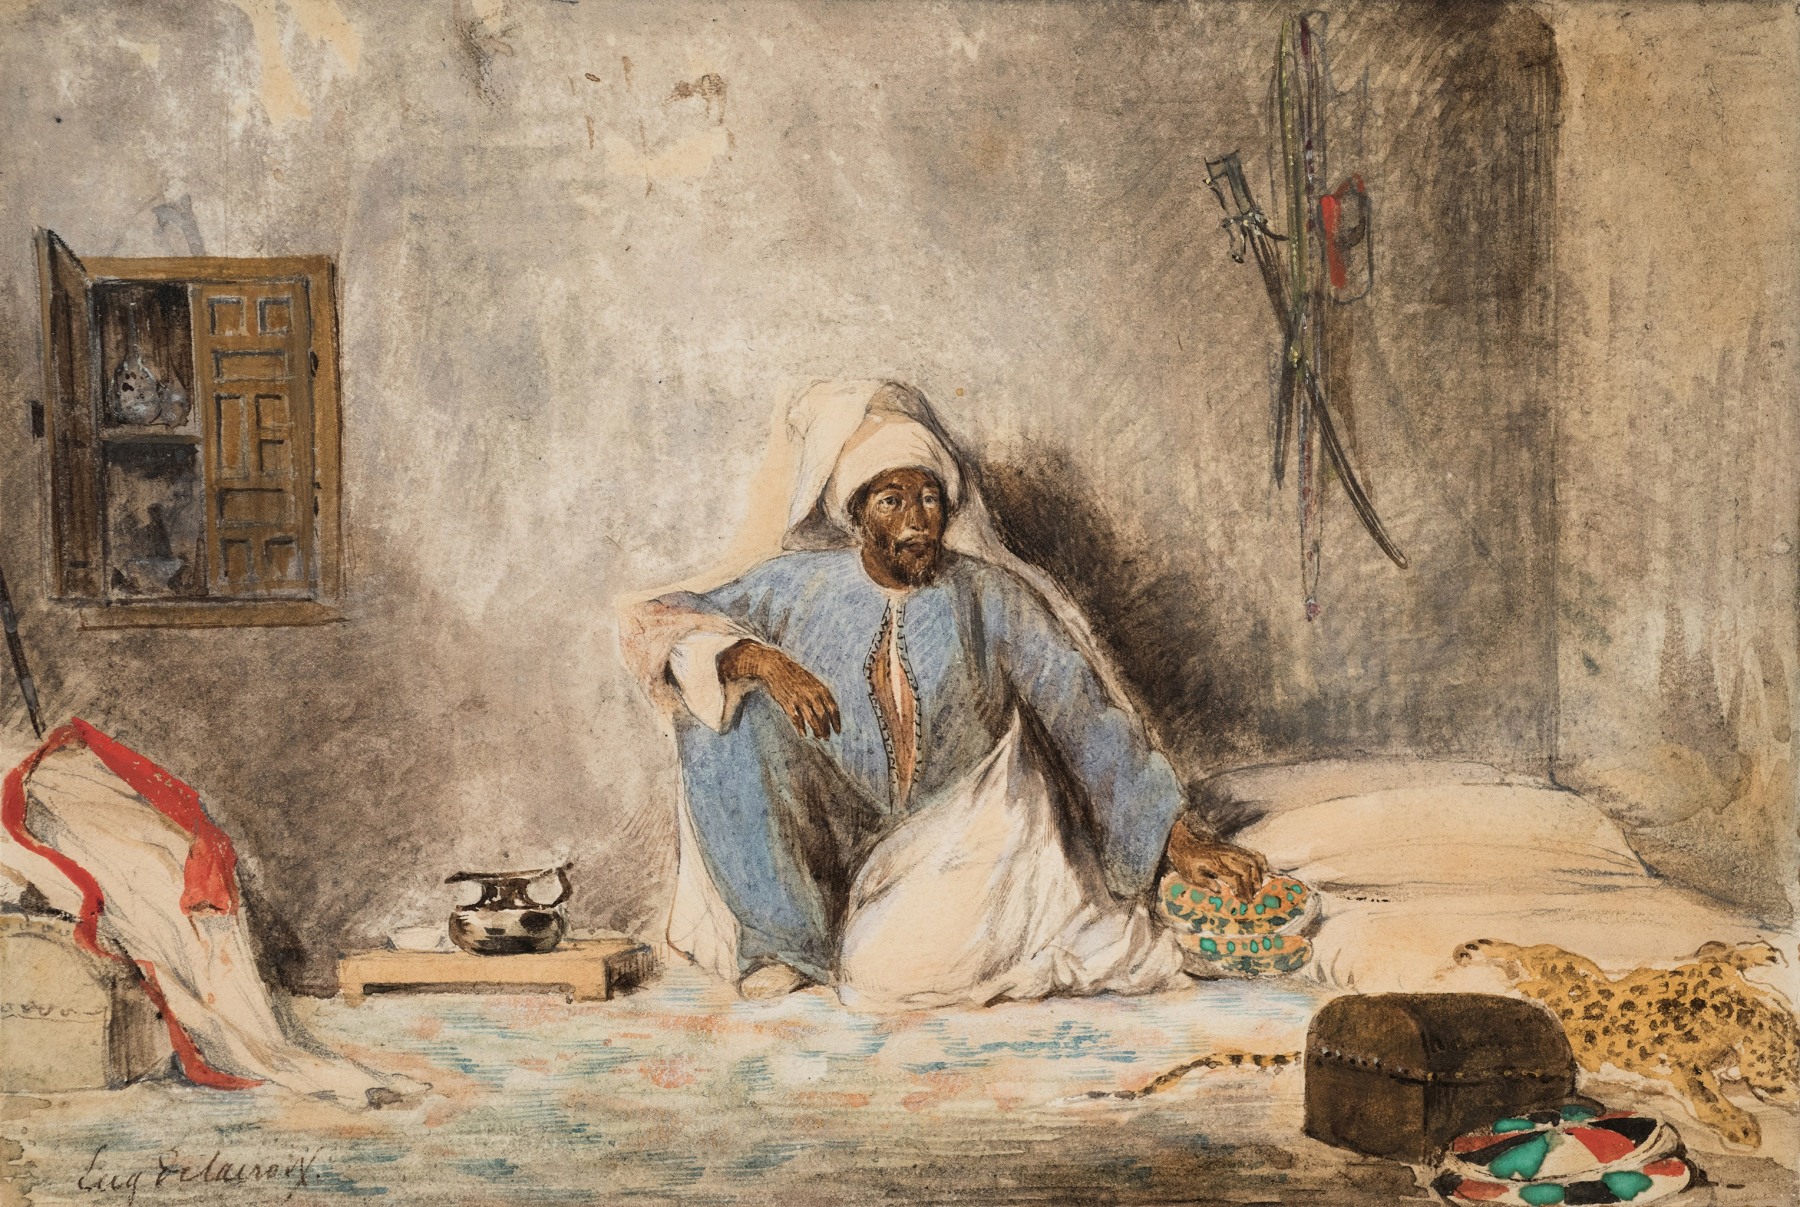 Eugene delacroix Military Chief ben Abou in a Morrocan Interior, 1832    Watercolor on paper 5 3/8 x 8 1/8 inches